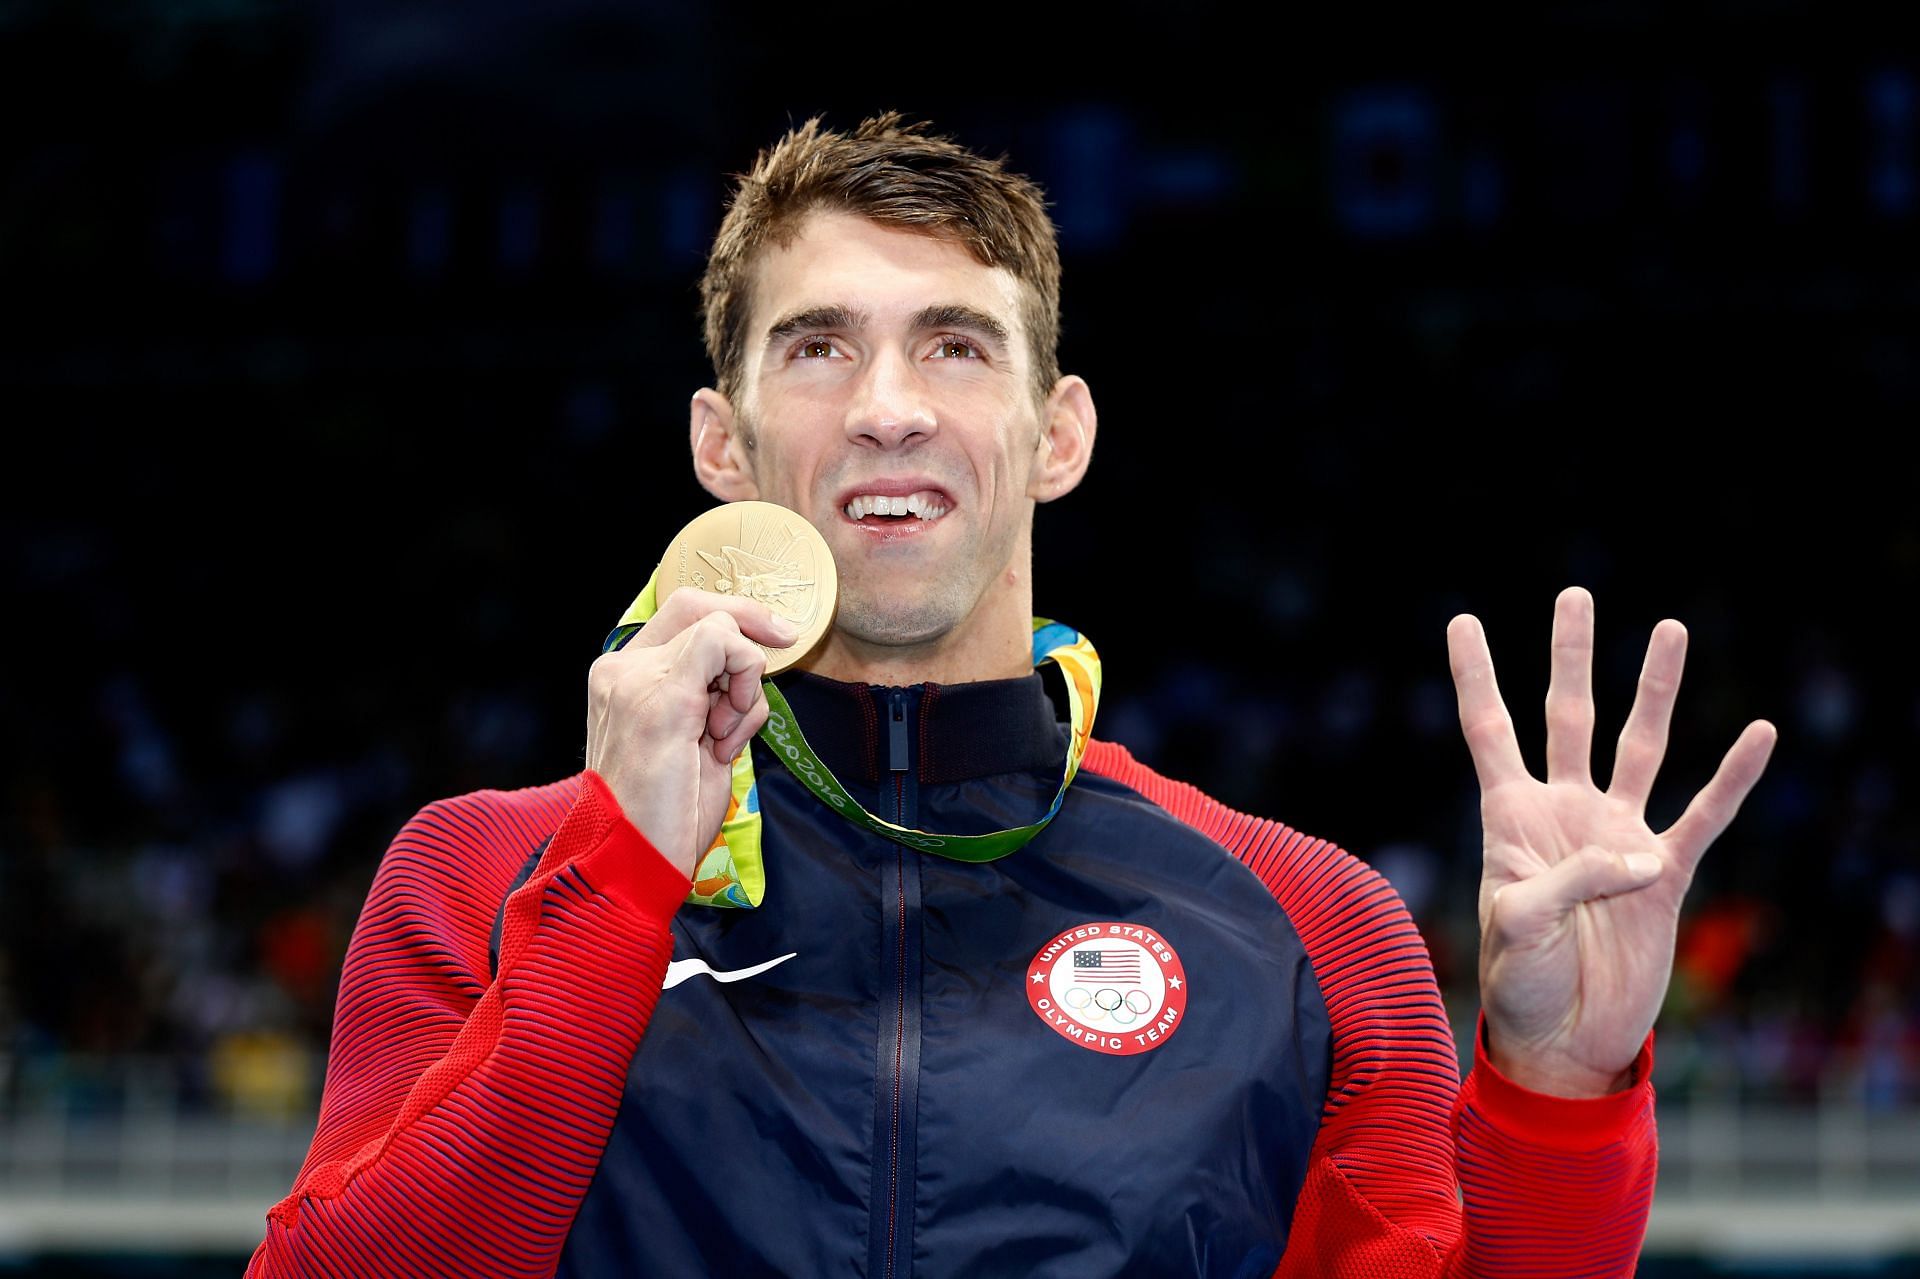 Michael Phelps at the 2016 Olympics